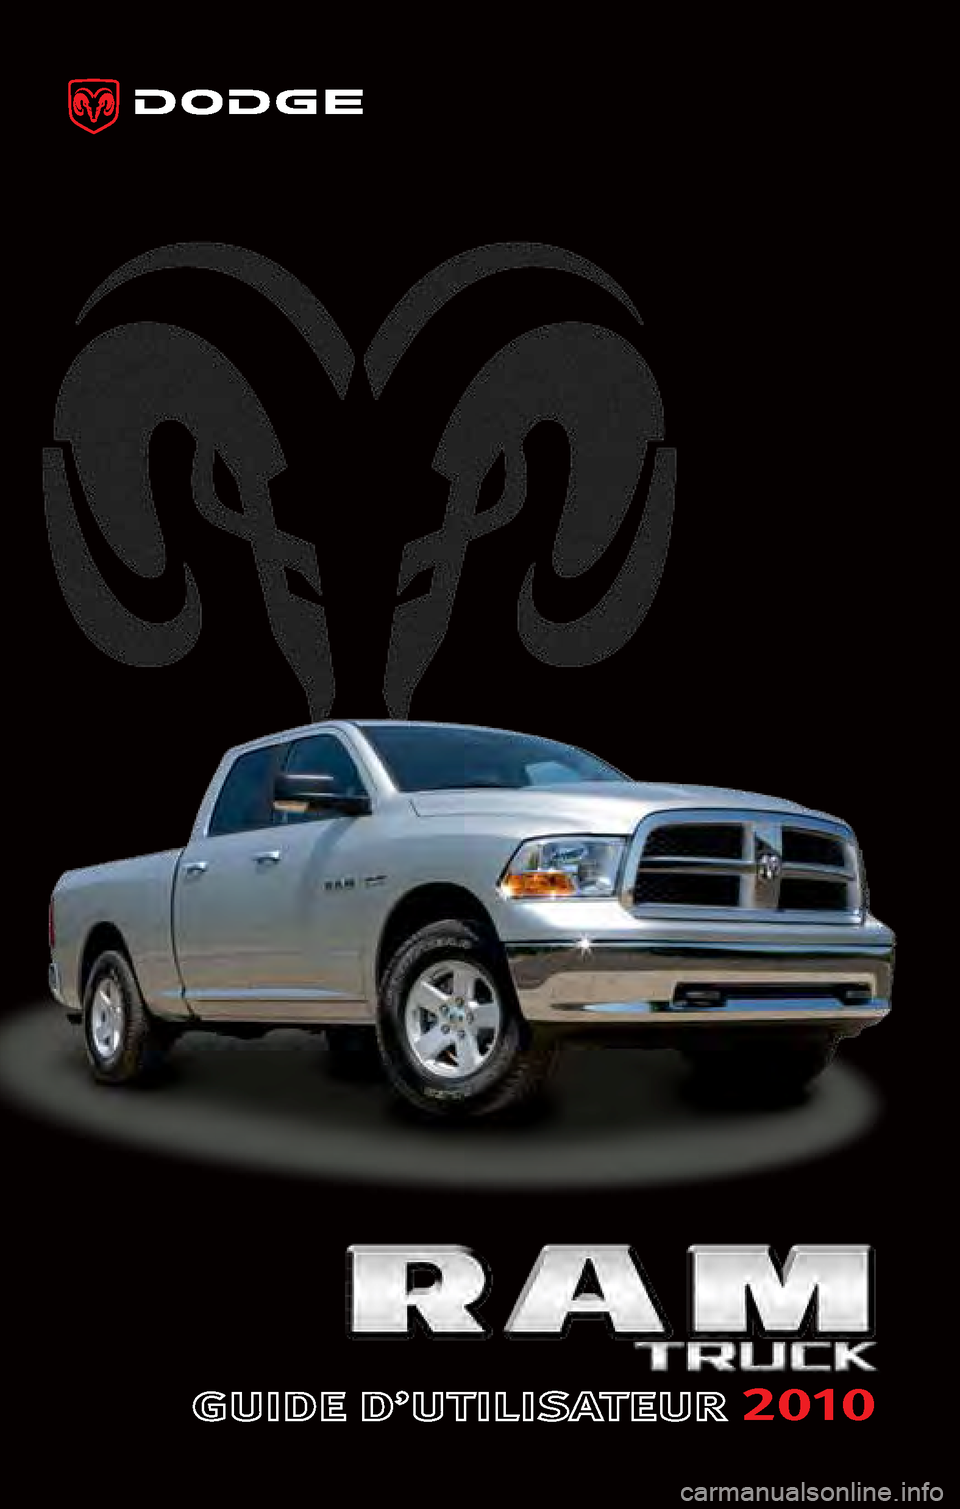 Ram 1500 2010  Guide dutilisateur (in French) 2010  